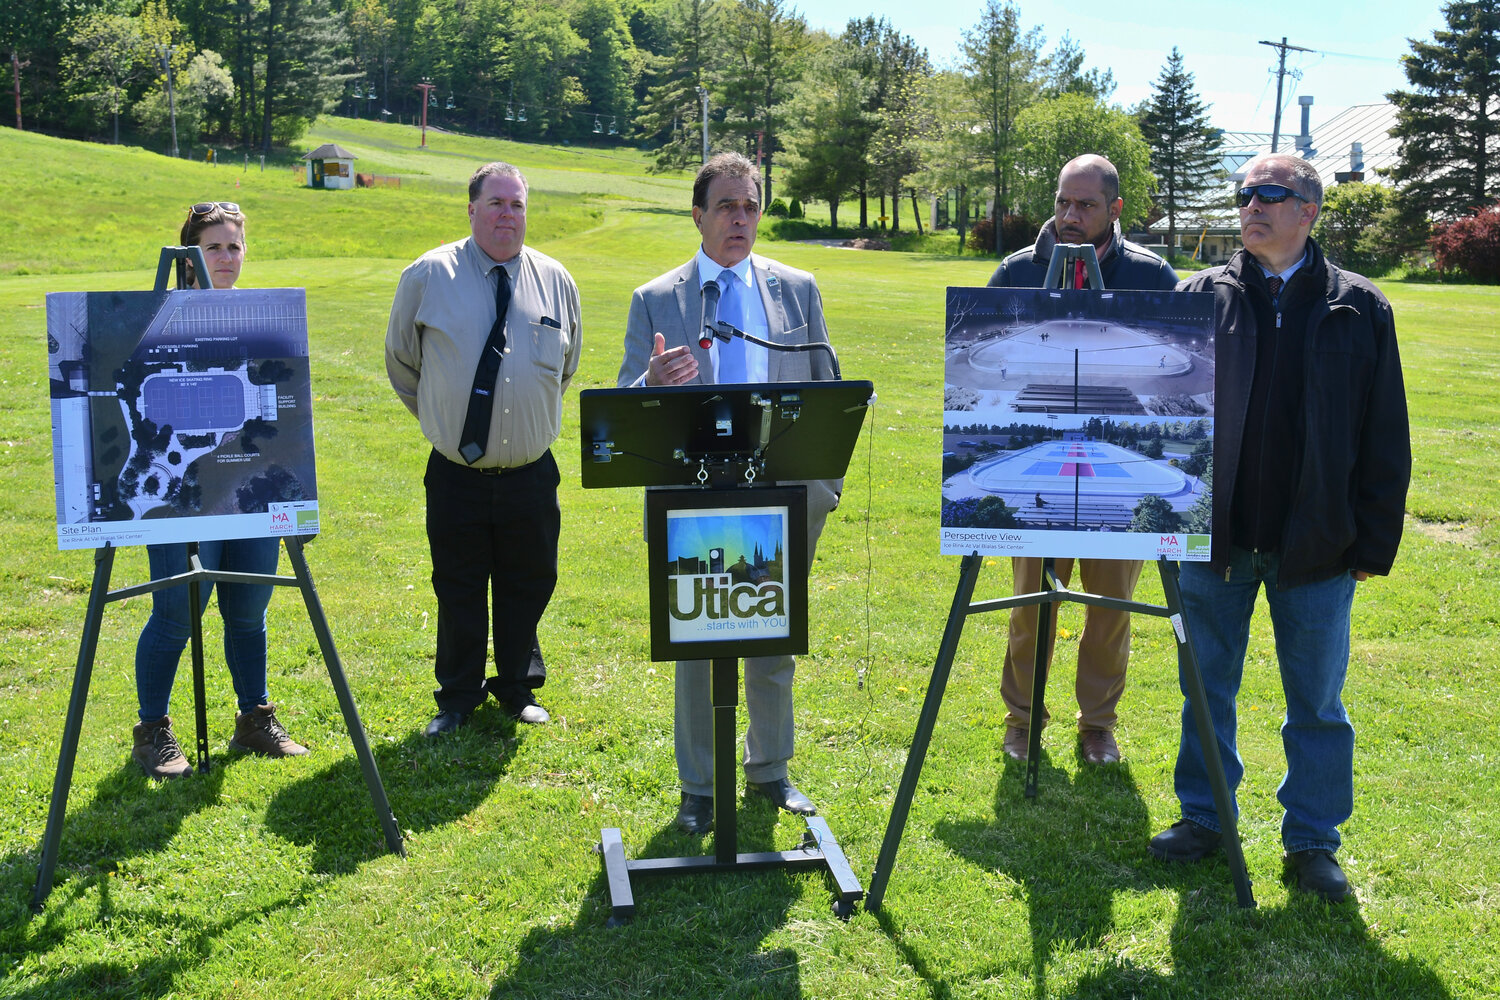 Utica Mayor Robert Palmieri, joined by city officials, announced the addition of a dual-purpose ice rink and pickleball court coming to Roscoe Conkling Park. Construction of the ice rink and pickleball court is expected to be complete by this fall.